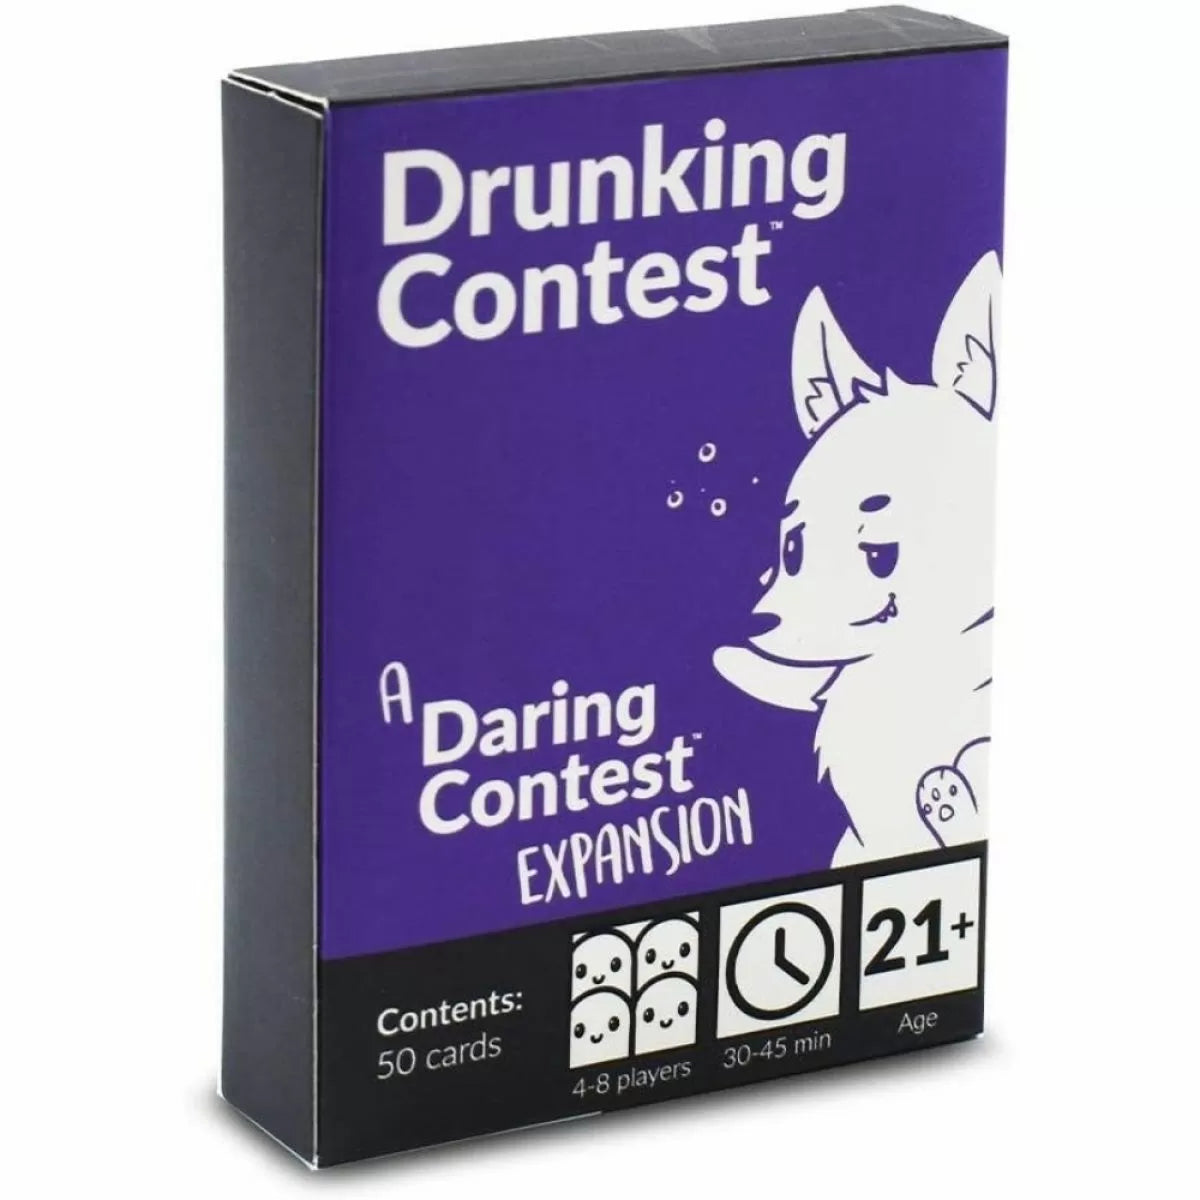 Daring Contest Drinking Expansion